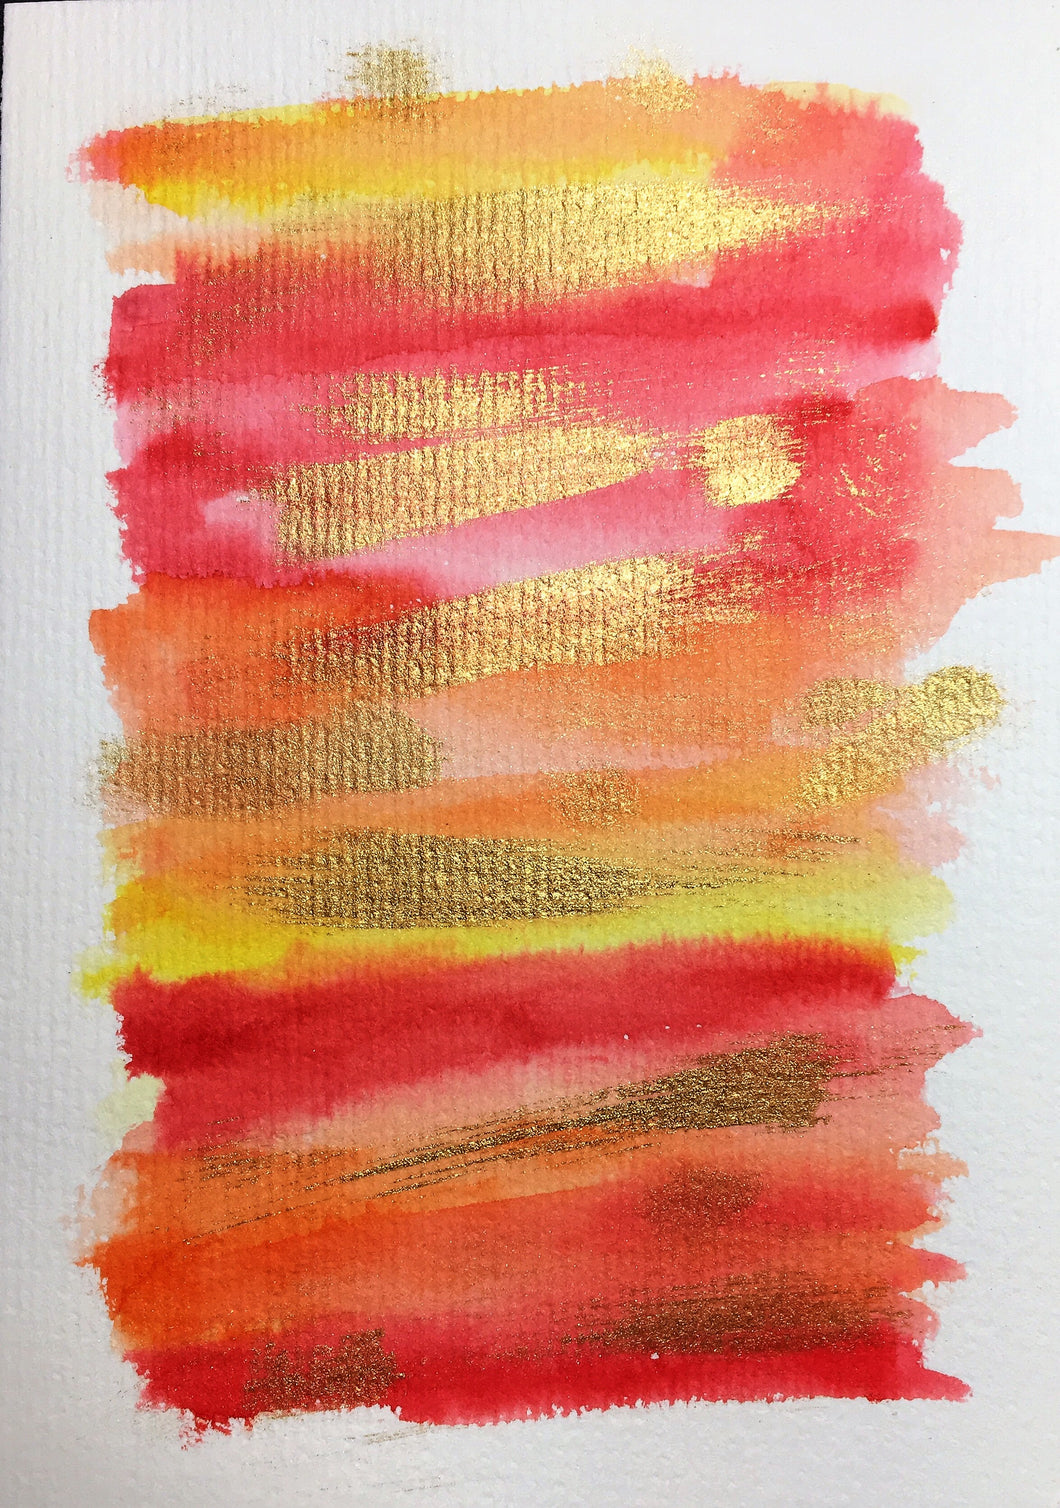 Handpainted Greeting Card - Abstract Red/Orange/Yellow Watercolour with Gold - eDgE dEsiGn London